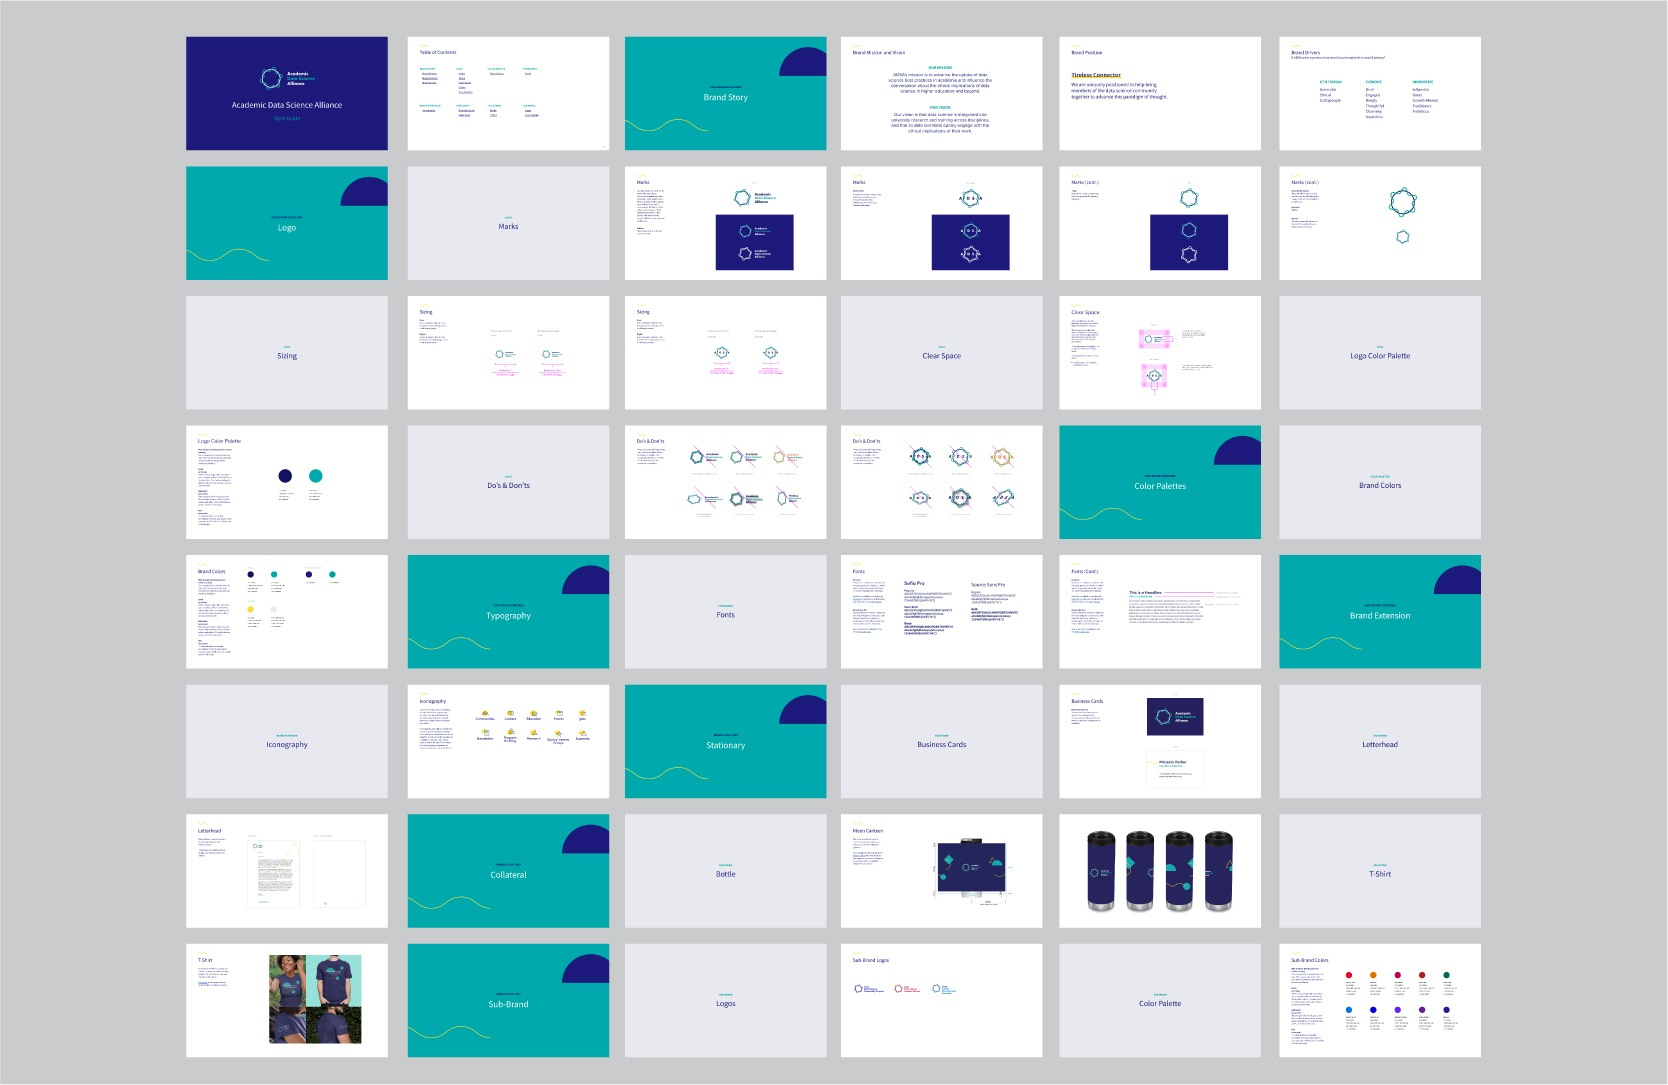 48 slides in a grid showcasing the ADSA website style guide